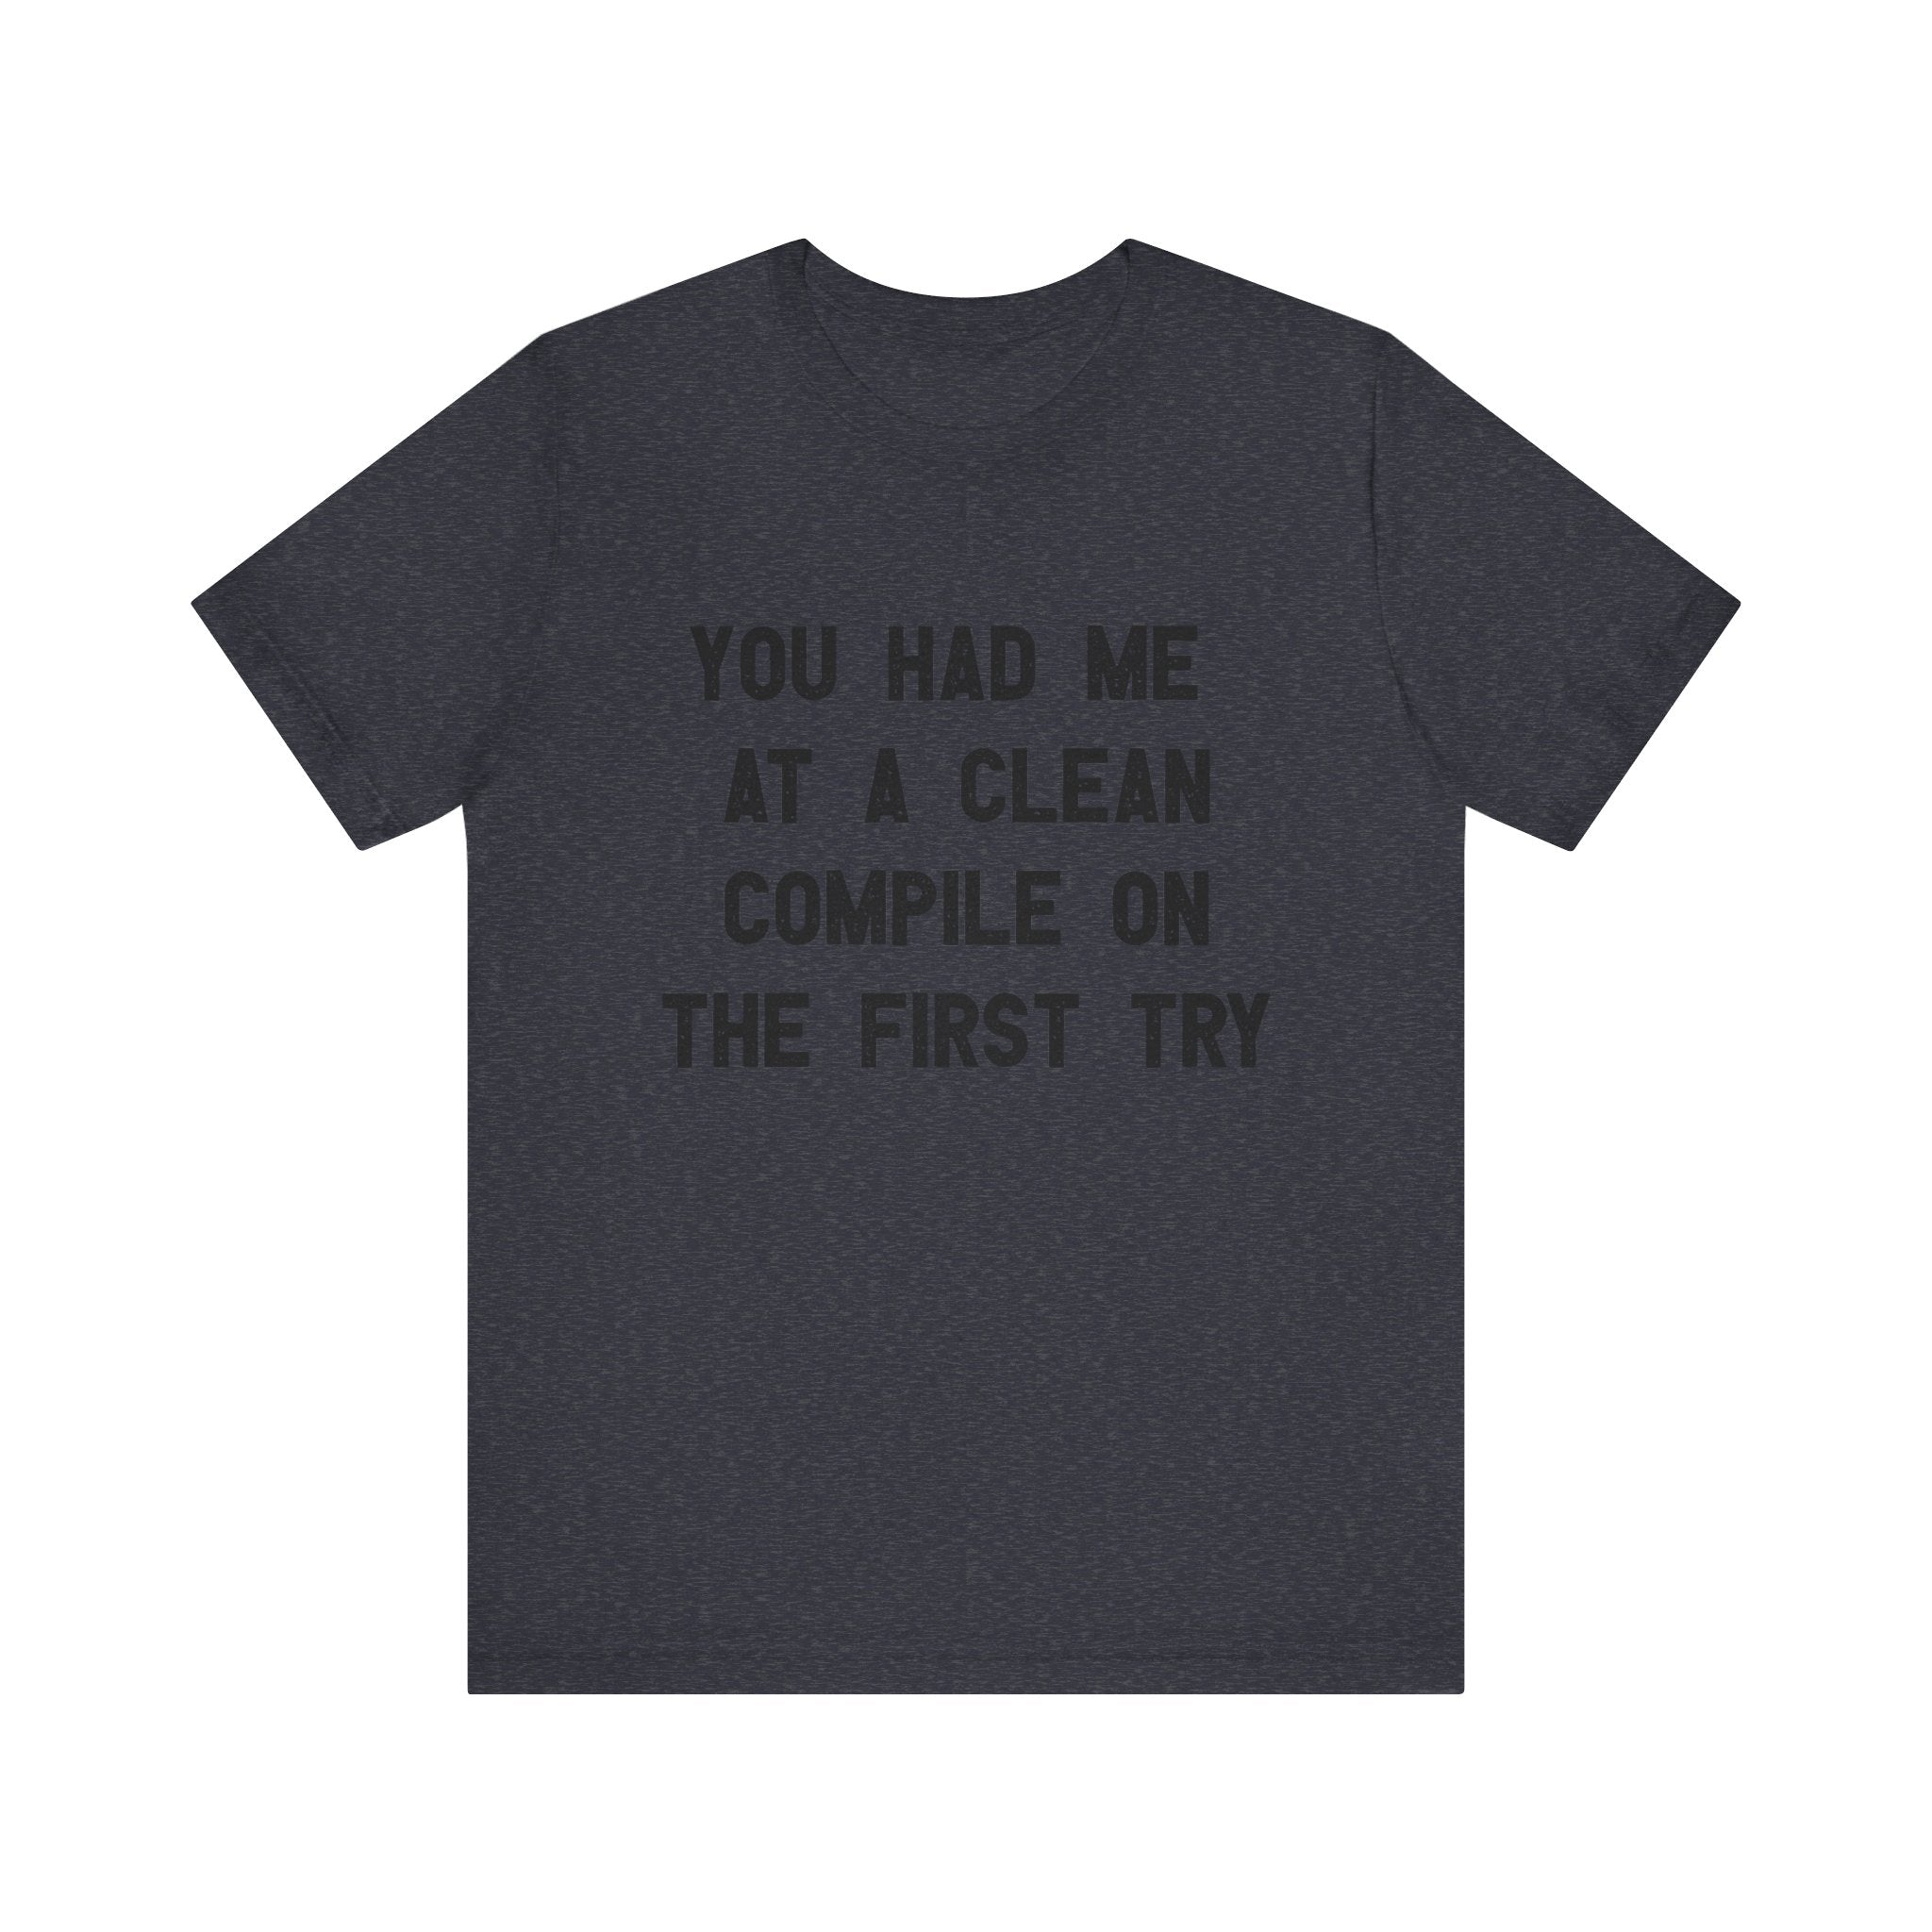 You Had Me At a Clean Compile on the First Try - T-Shirt